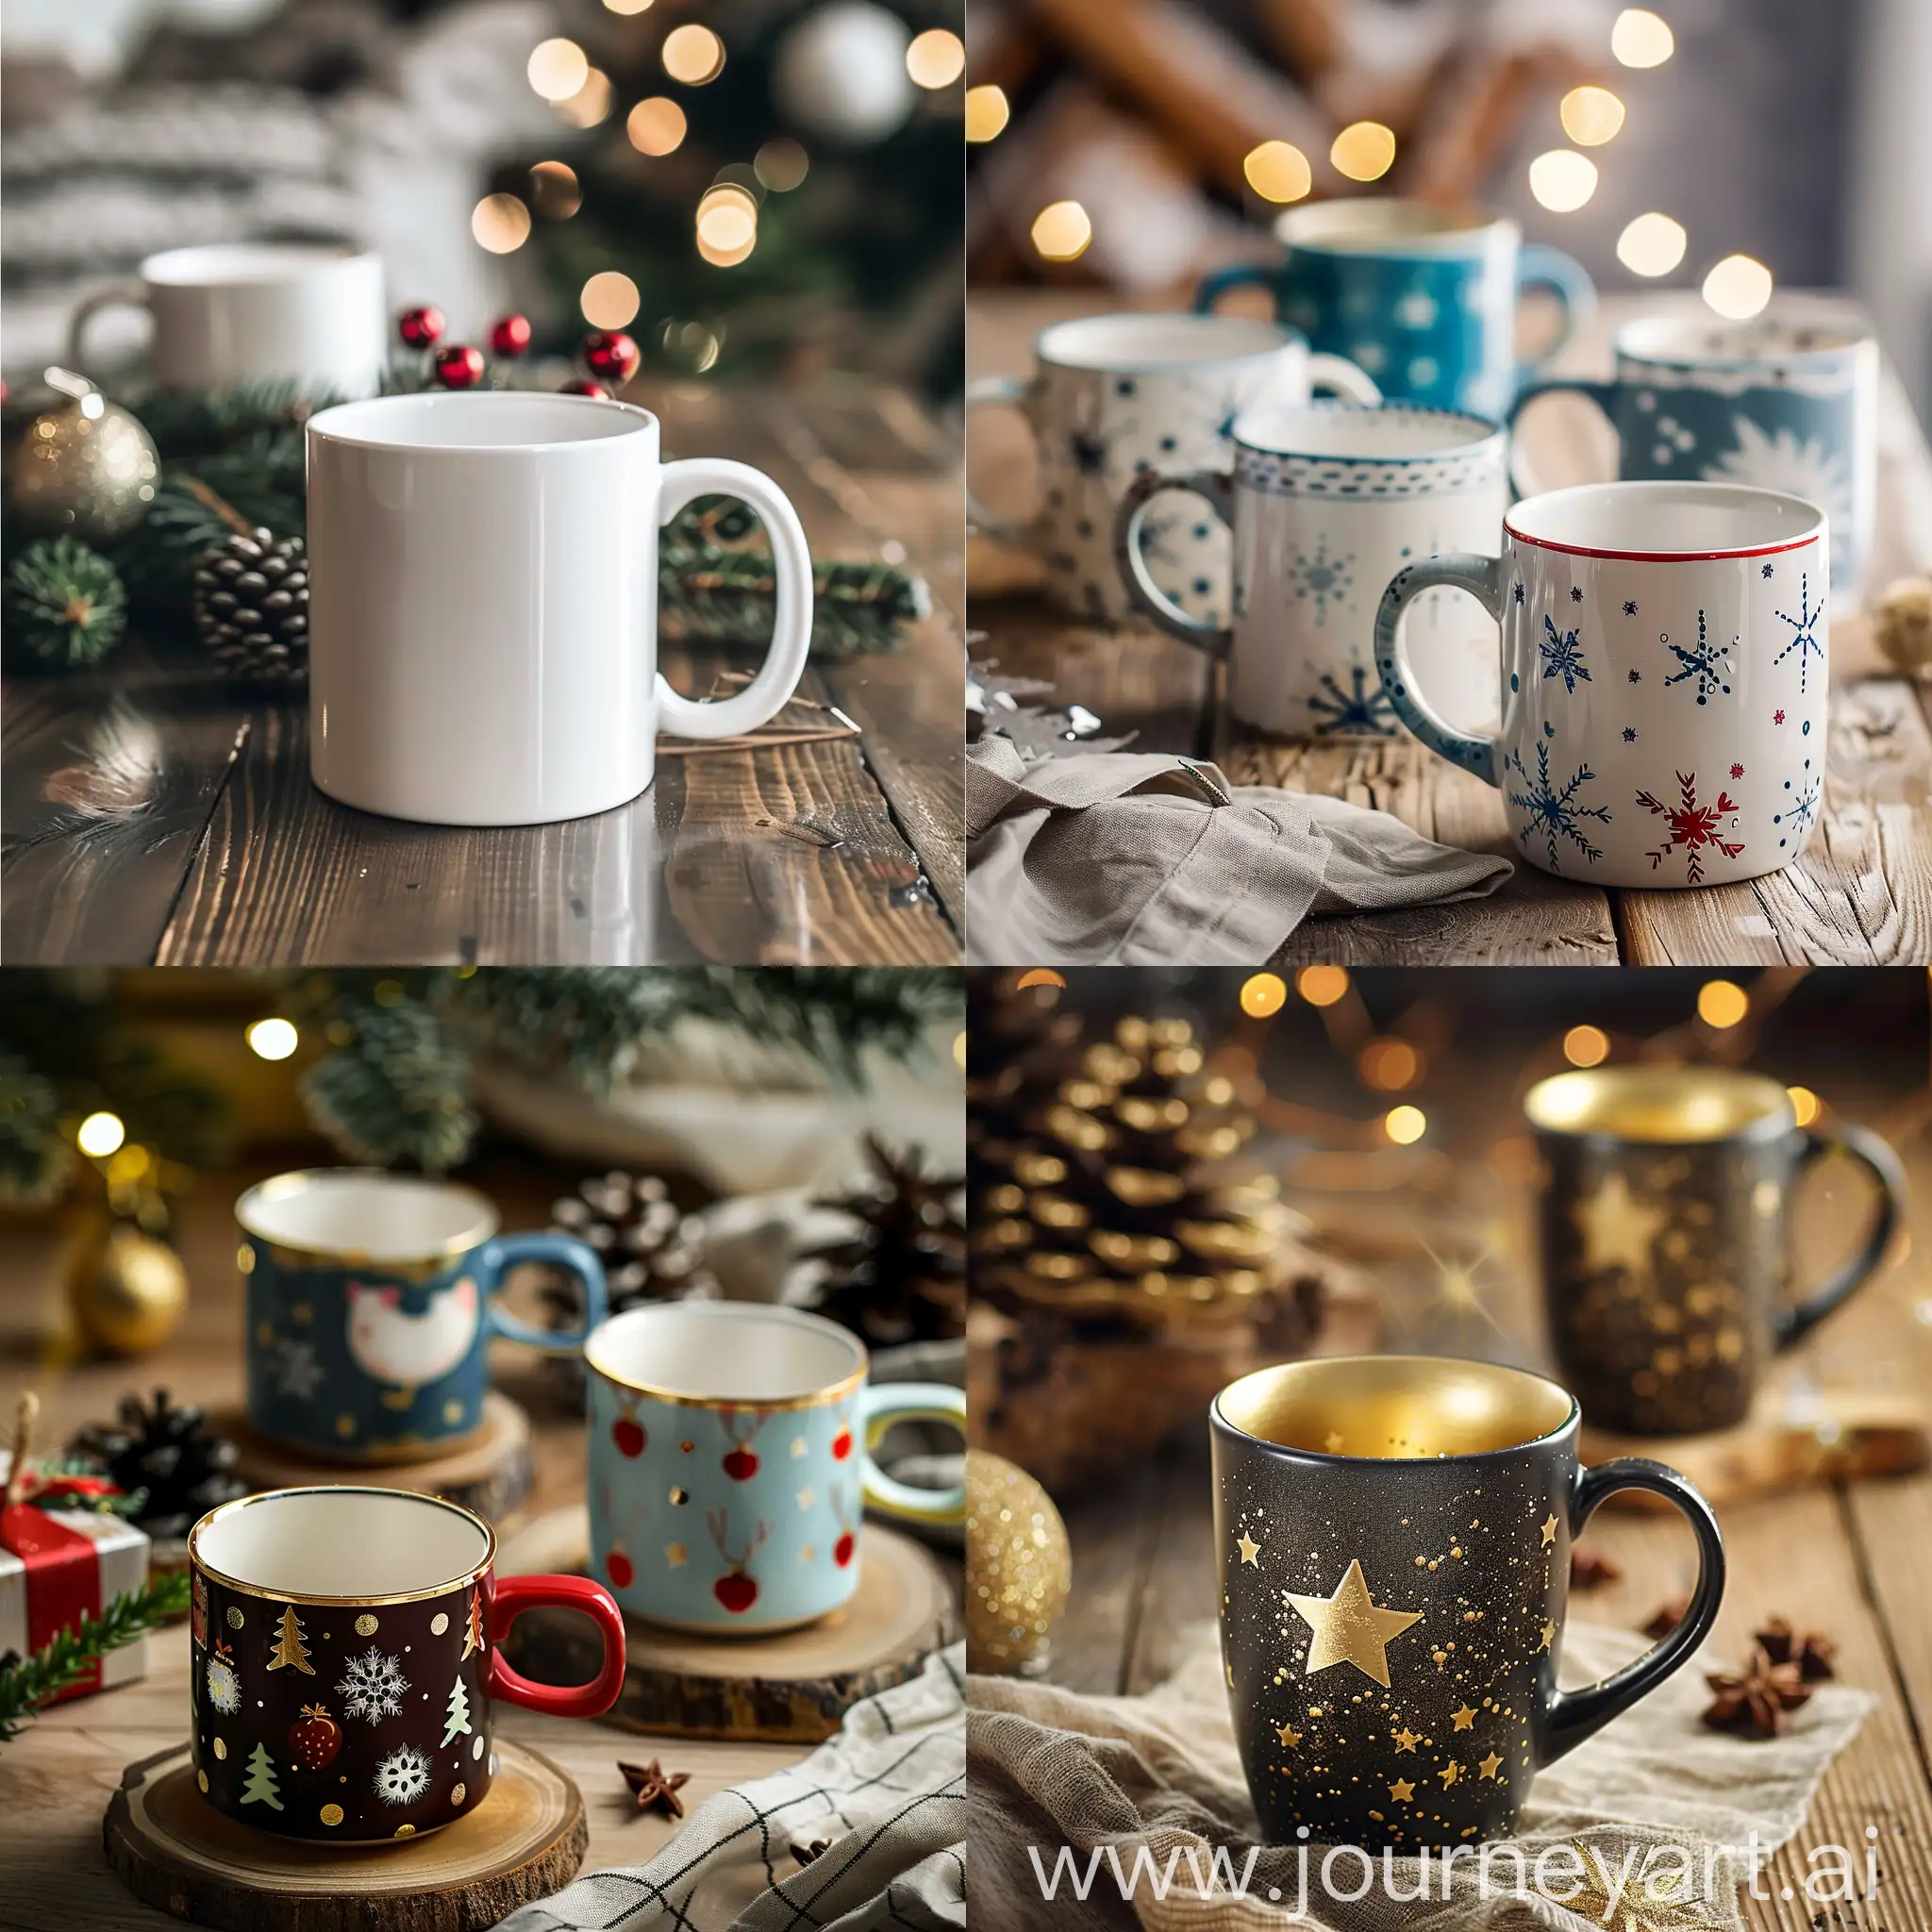 a blog image shows sublimation mug company's new year business outlook